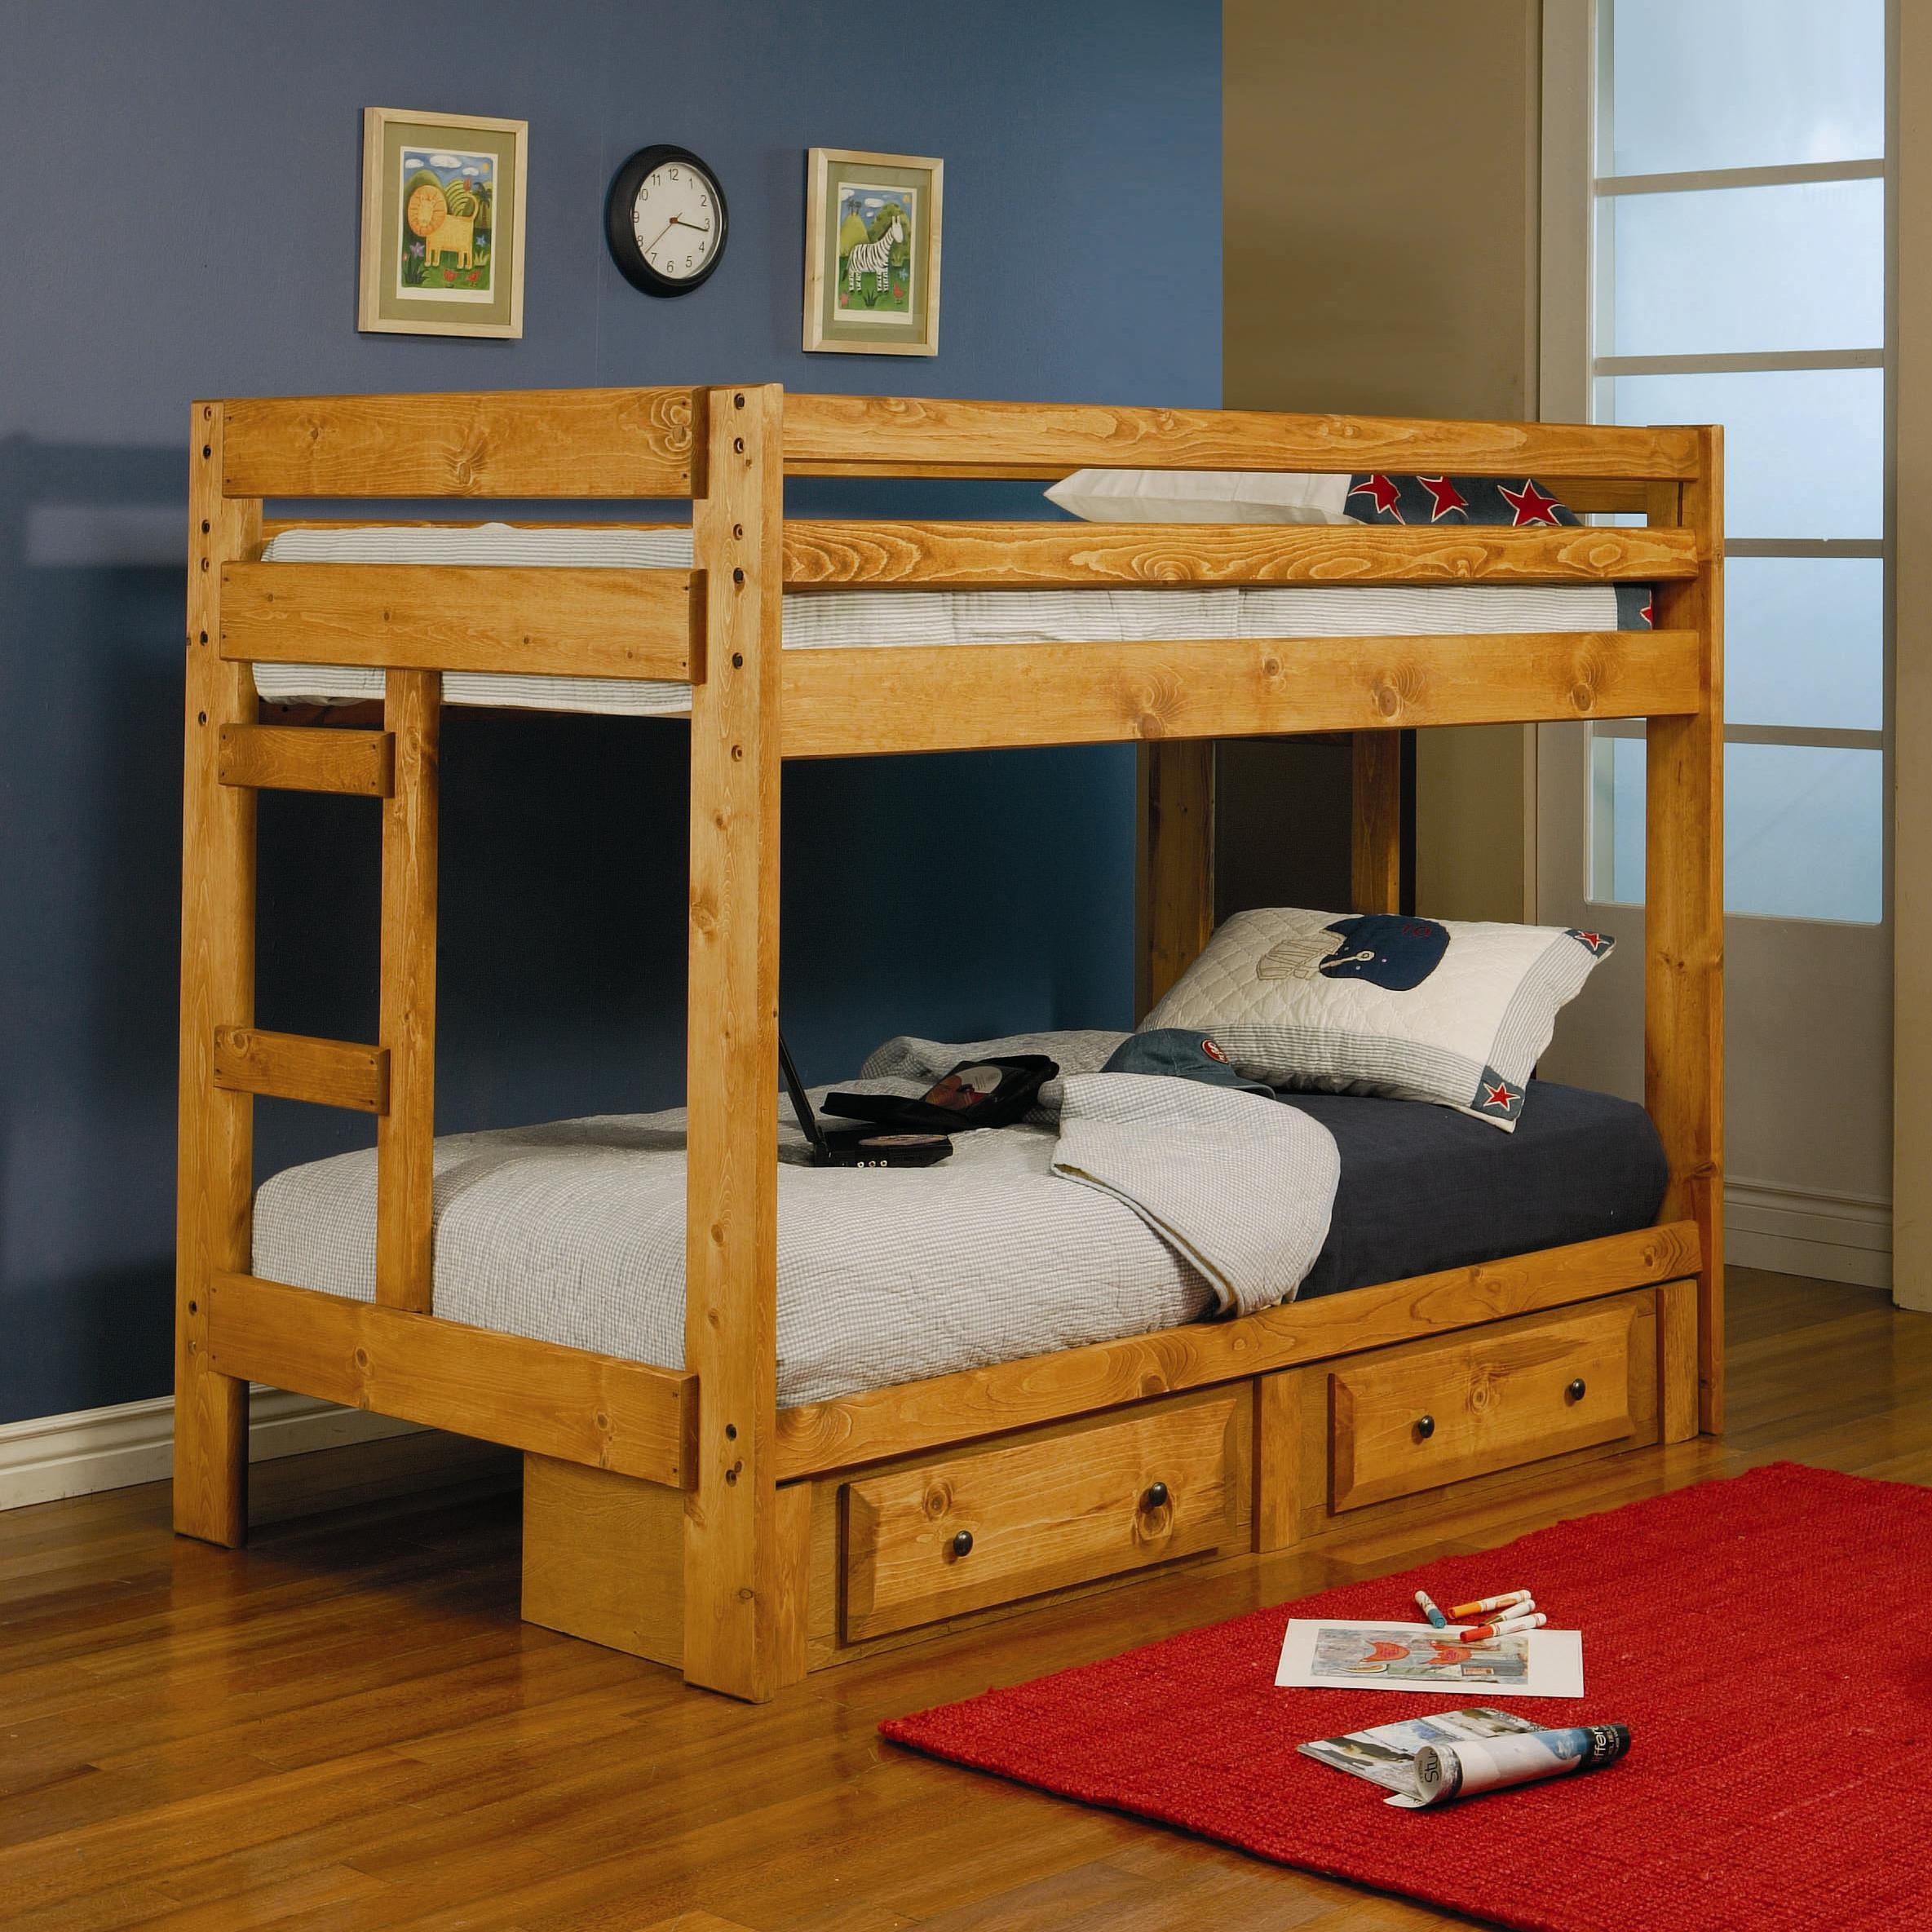 Amber solid wood bunk bed with stairway chest twin over